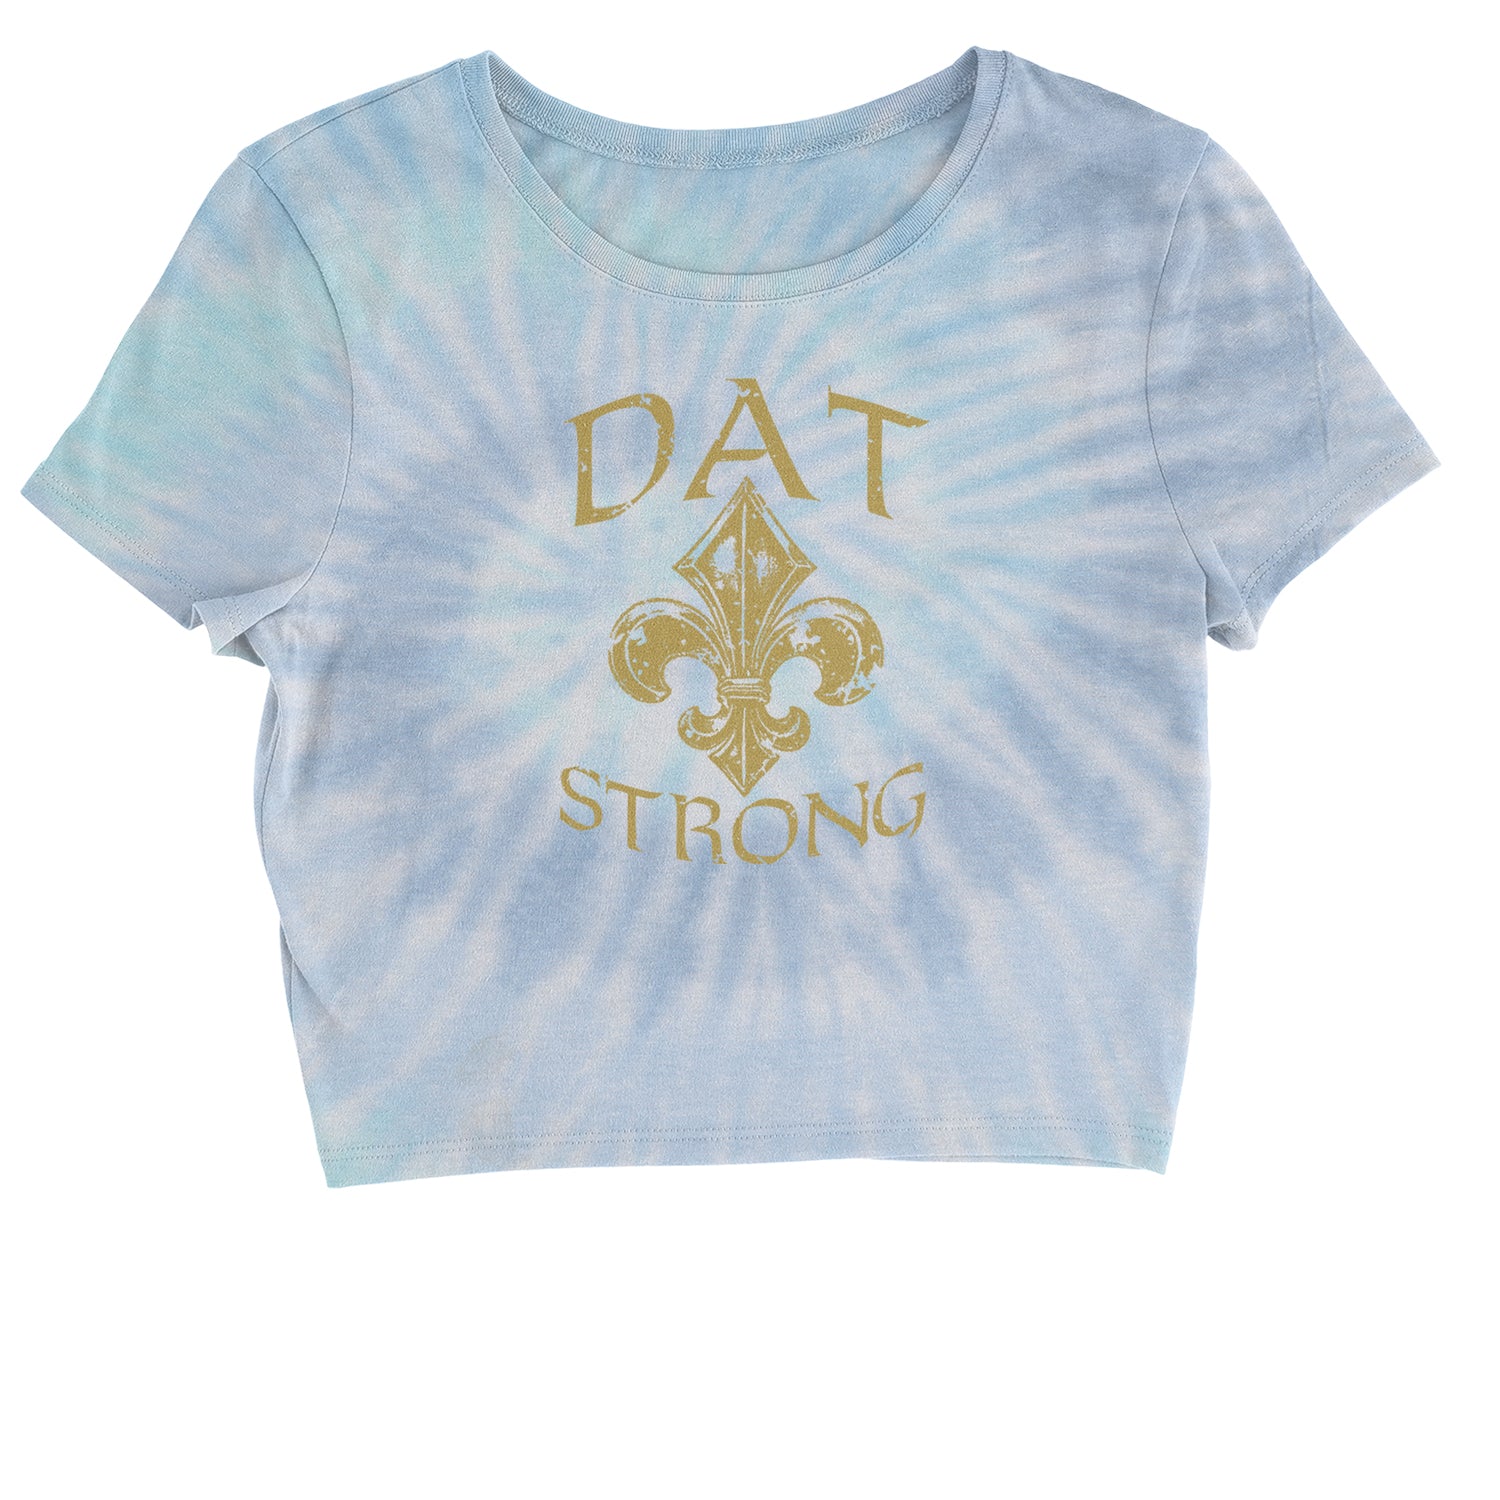 Dat Strong New Orleans Cropped T-Shirt dat, de, fan, fleur, jersey, lis, new, orleans, sports, strong, who by Expression Tees